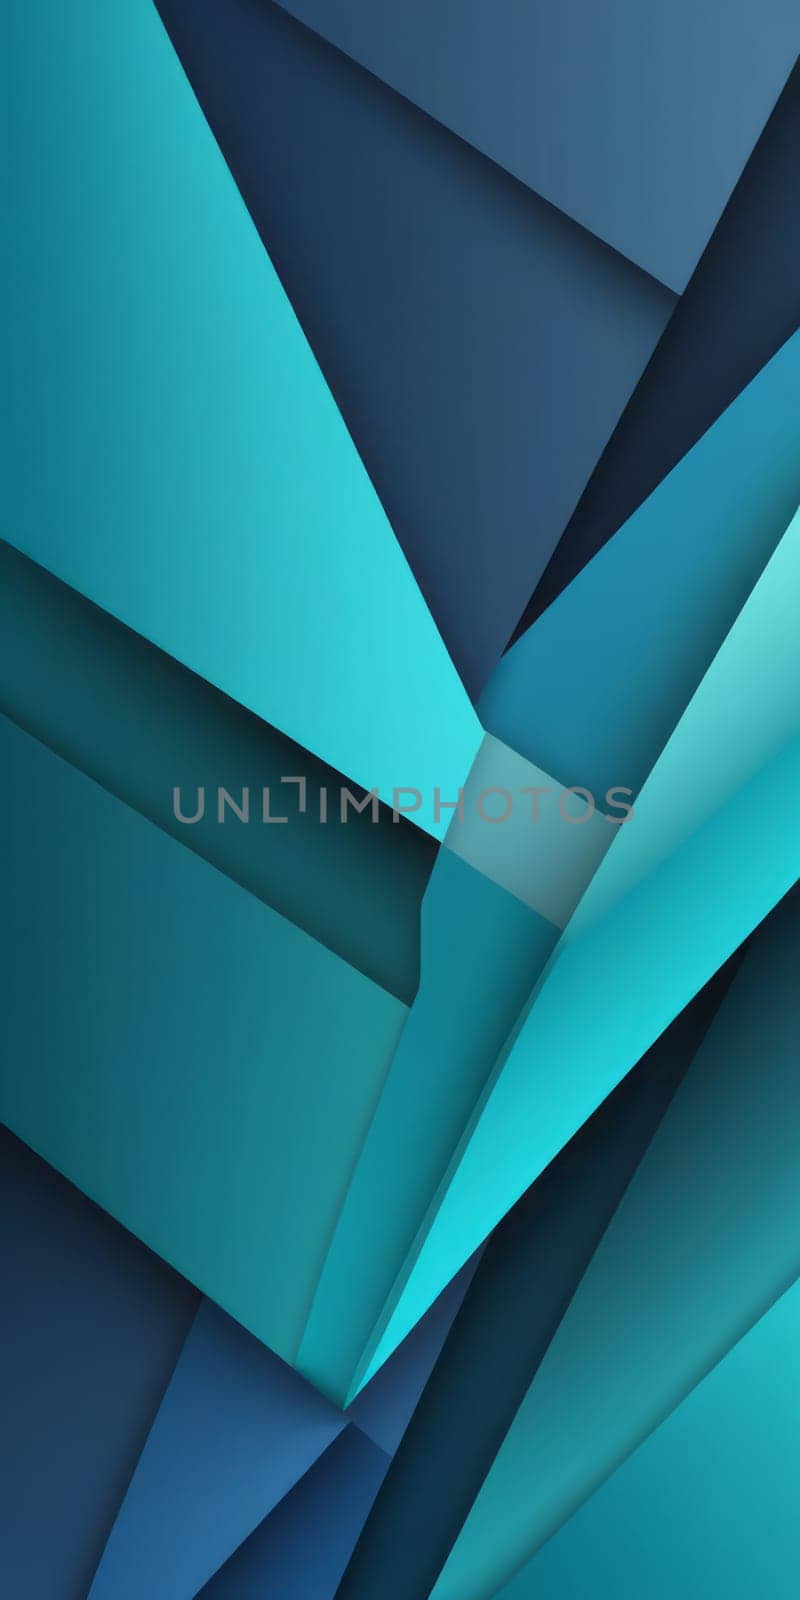 Asymmetrical Shapes in Teal and Blue by nkotlyar